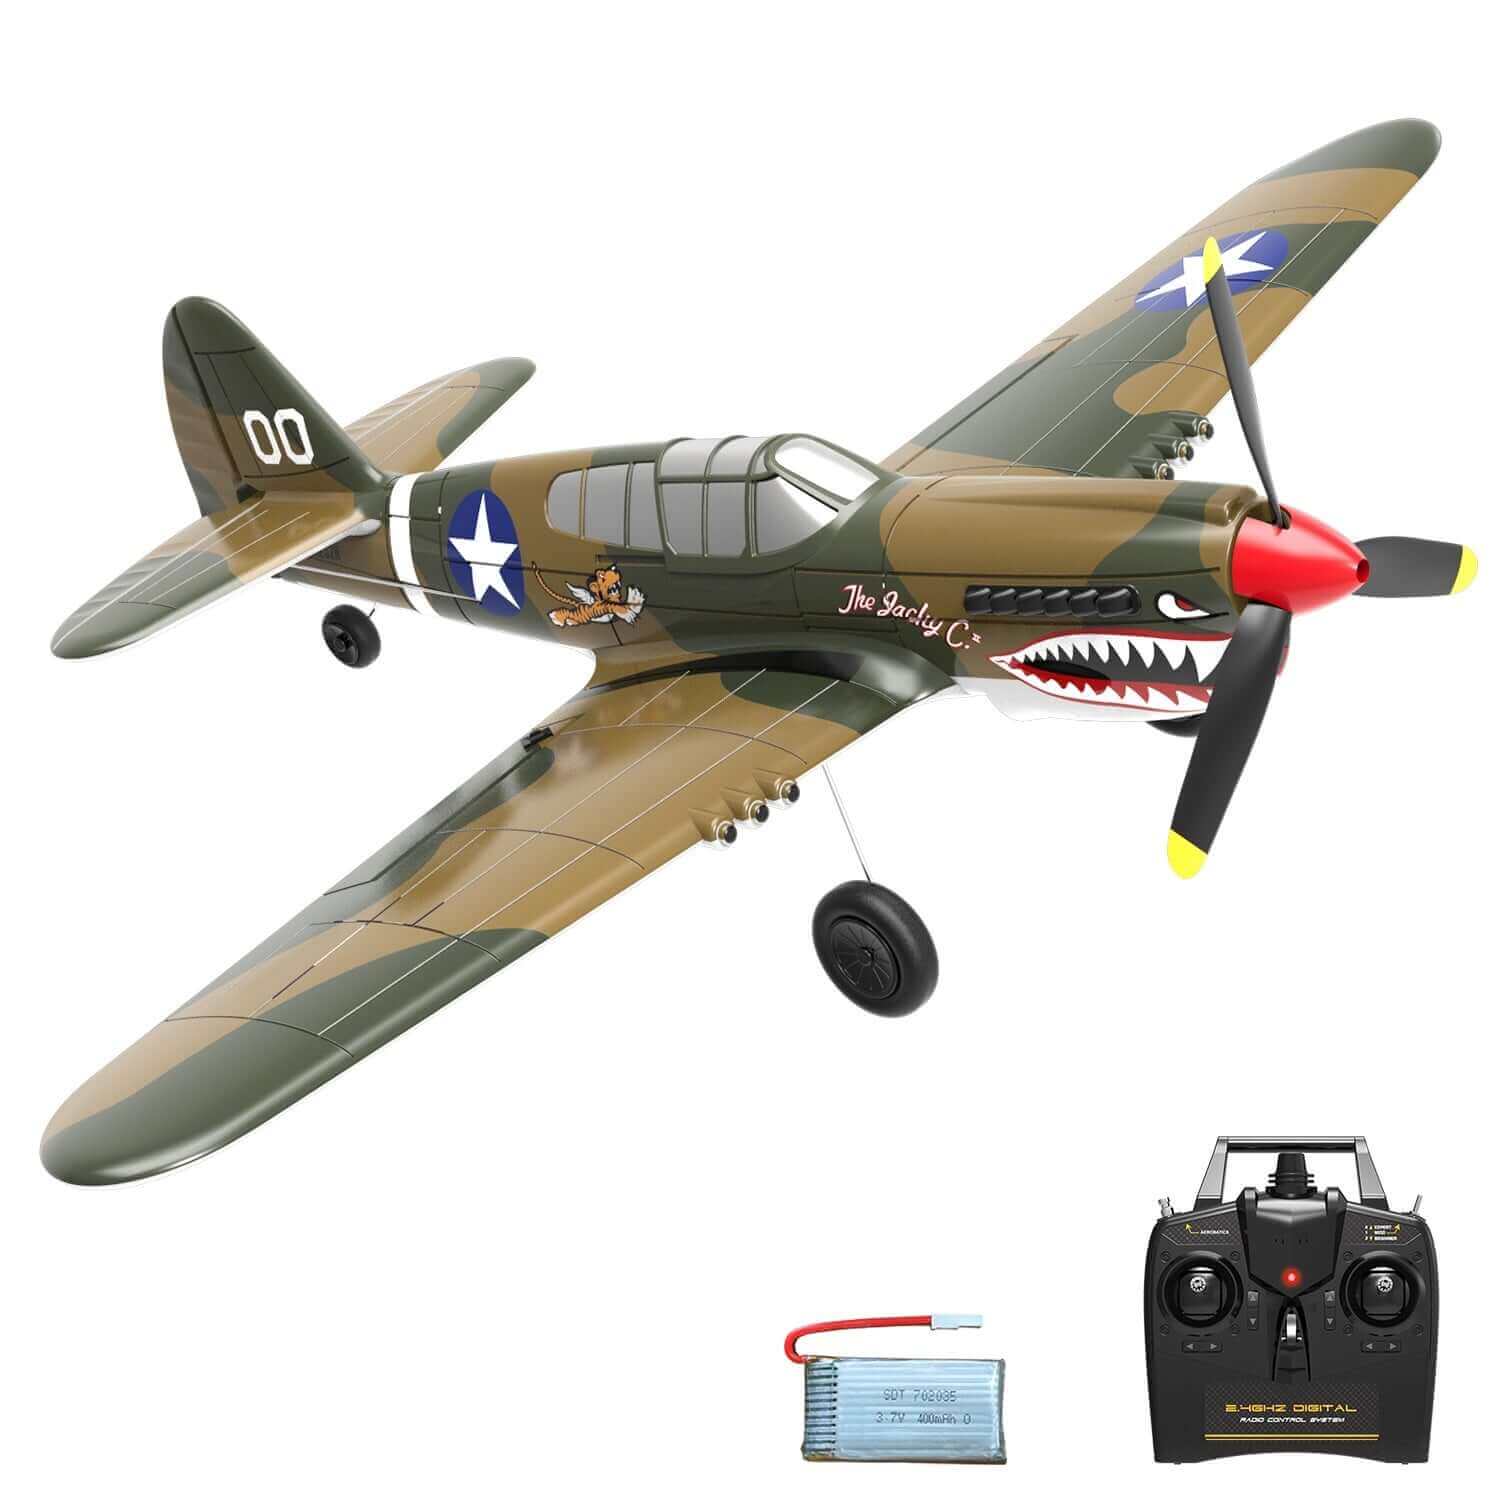  P-40 Warbird RC Fighter: Aerobatic Fun with 400mm Wingspan & 4CH Control | Kids toy lover